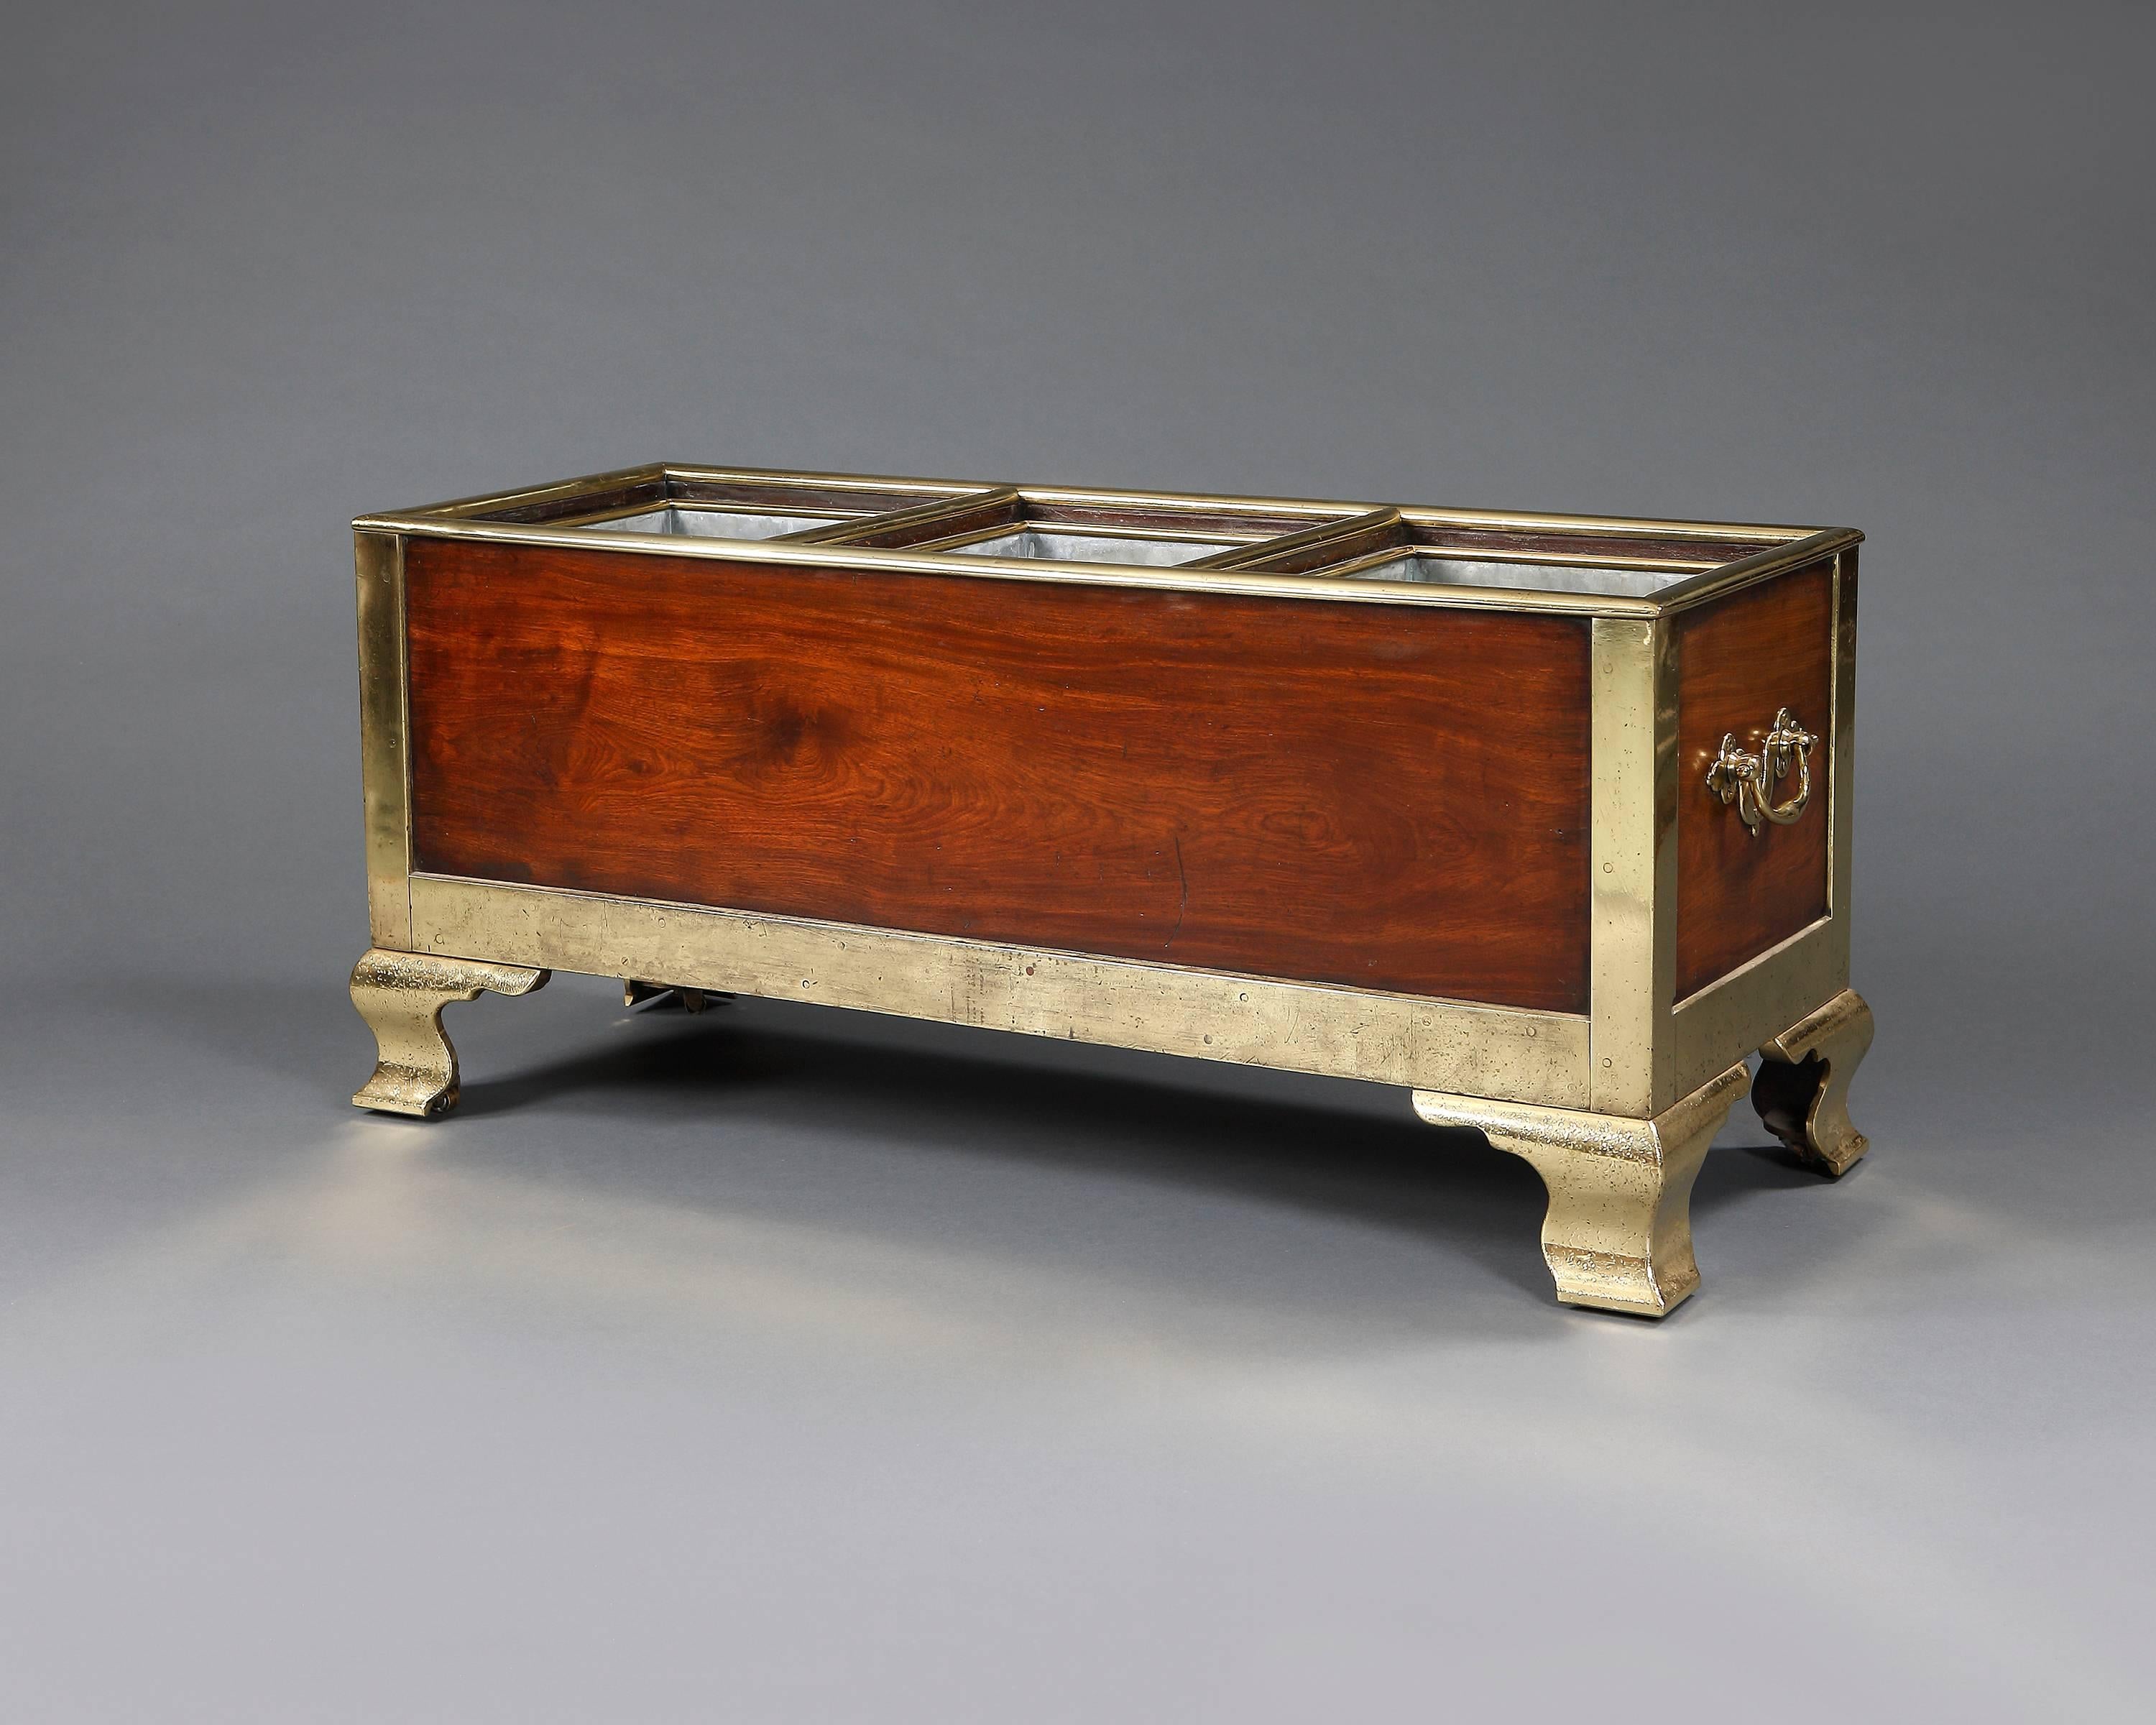 A magnificent mahogany brass bound planter or wine cooler with three divisions. The three liners and shaped bracket feet are later replacements, English, circa 1775.